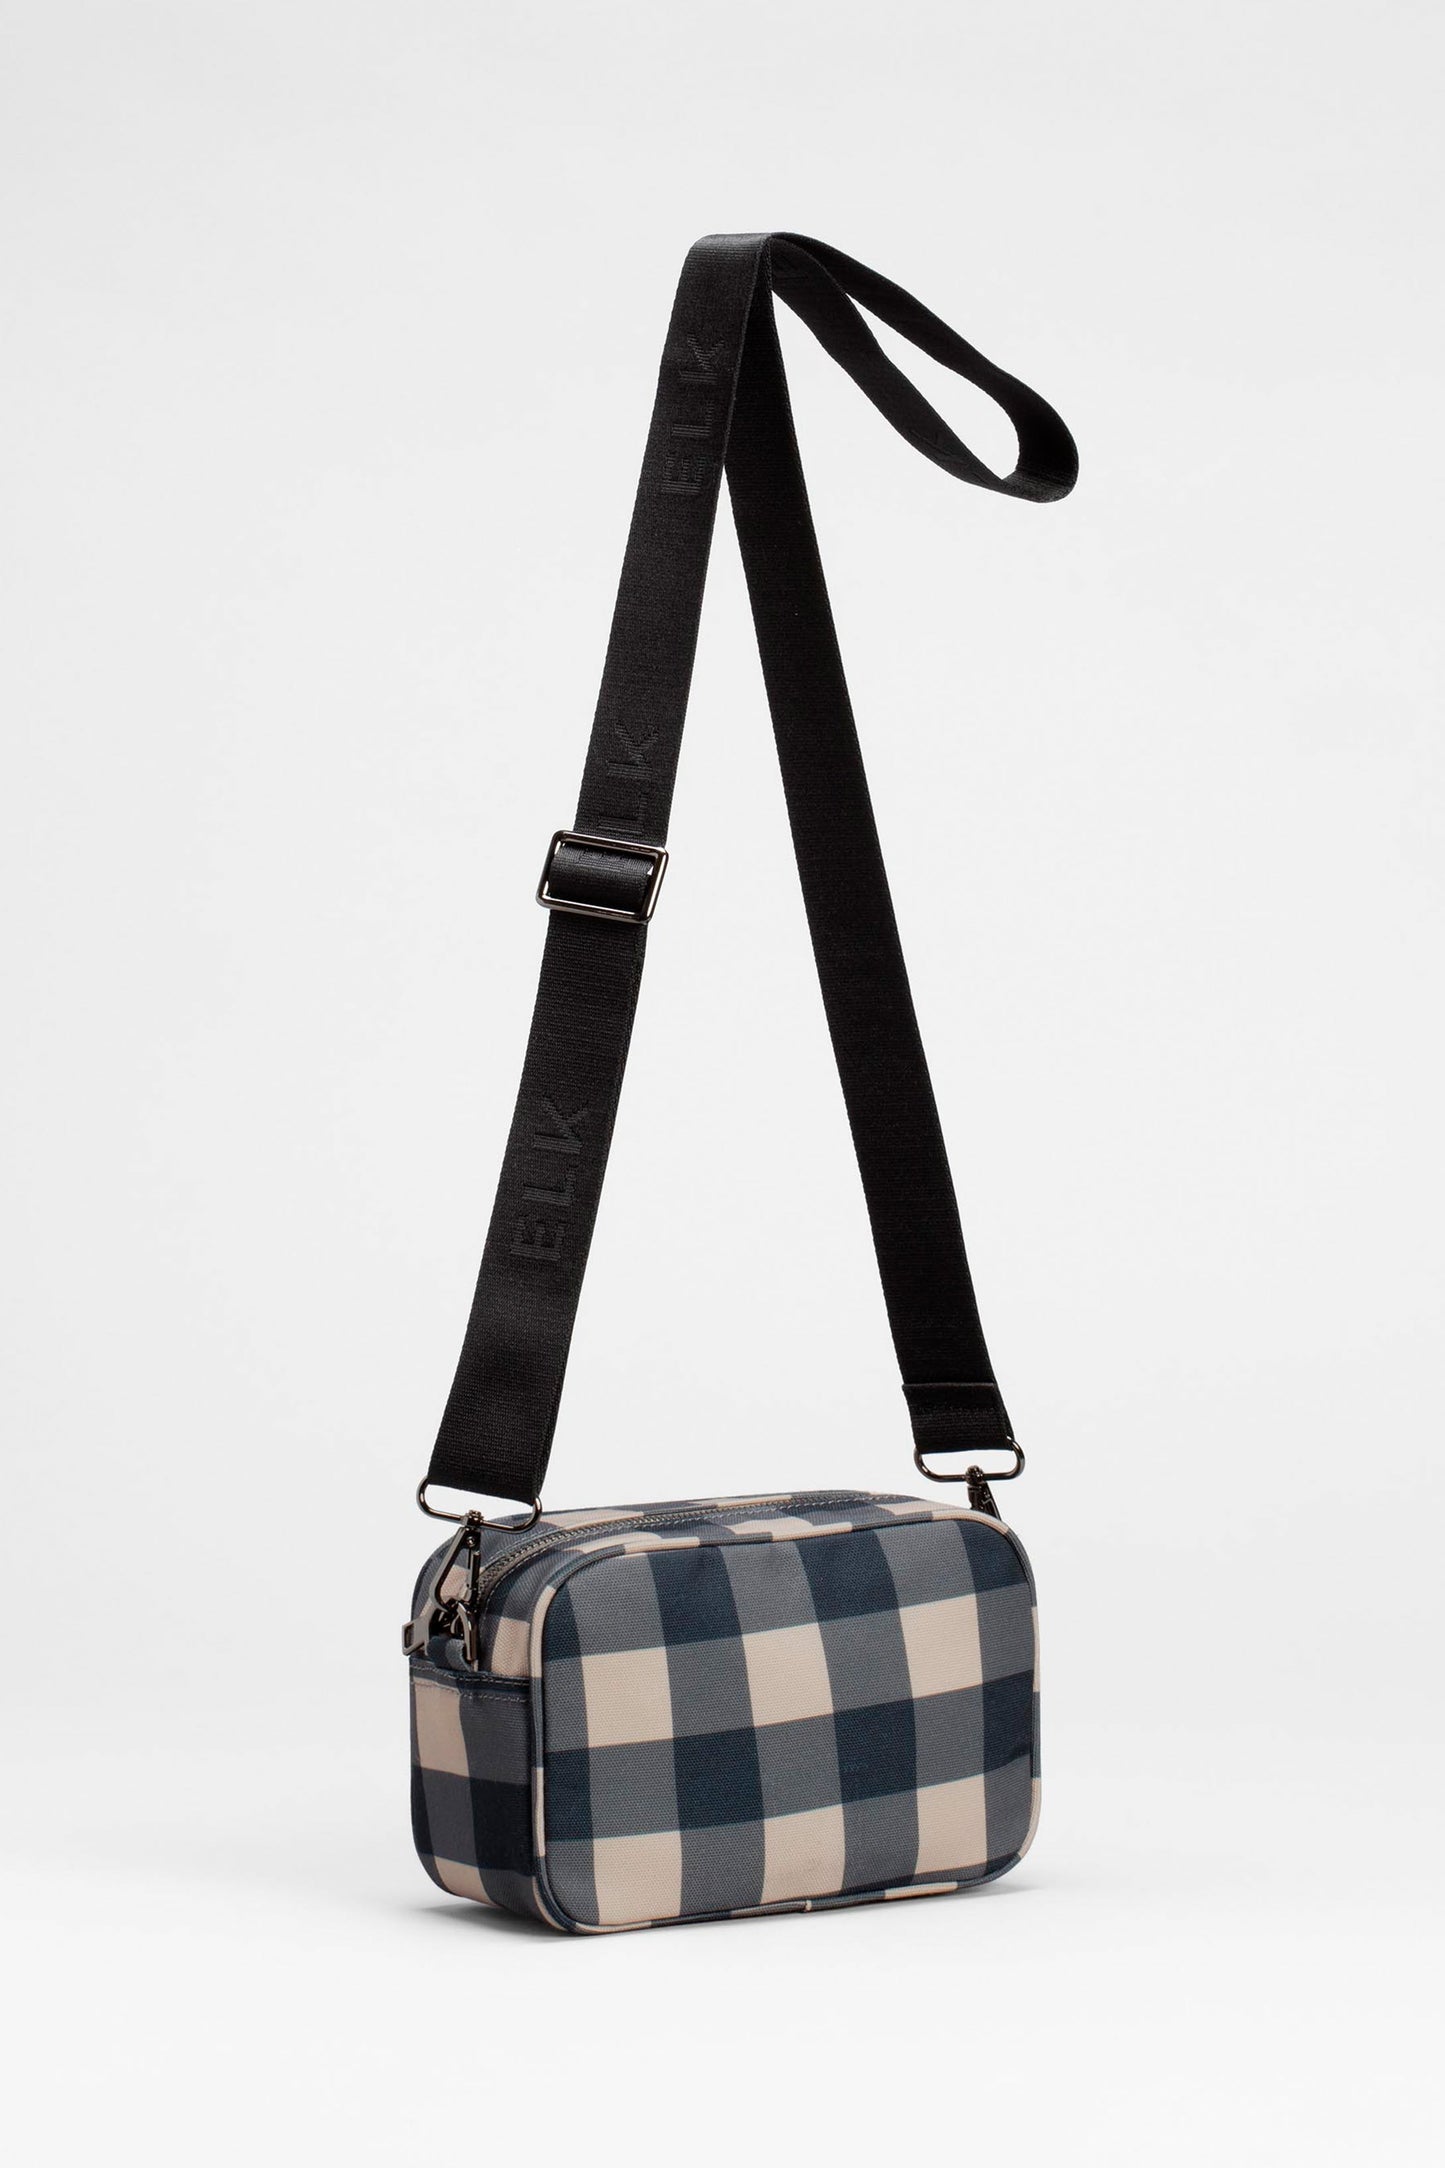 Kassel Recycled Fabric Gingham Print Zip Up Cross Body Bag Front | BLACK CAMEL GINGHAM